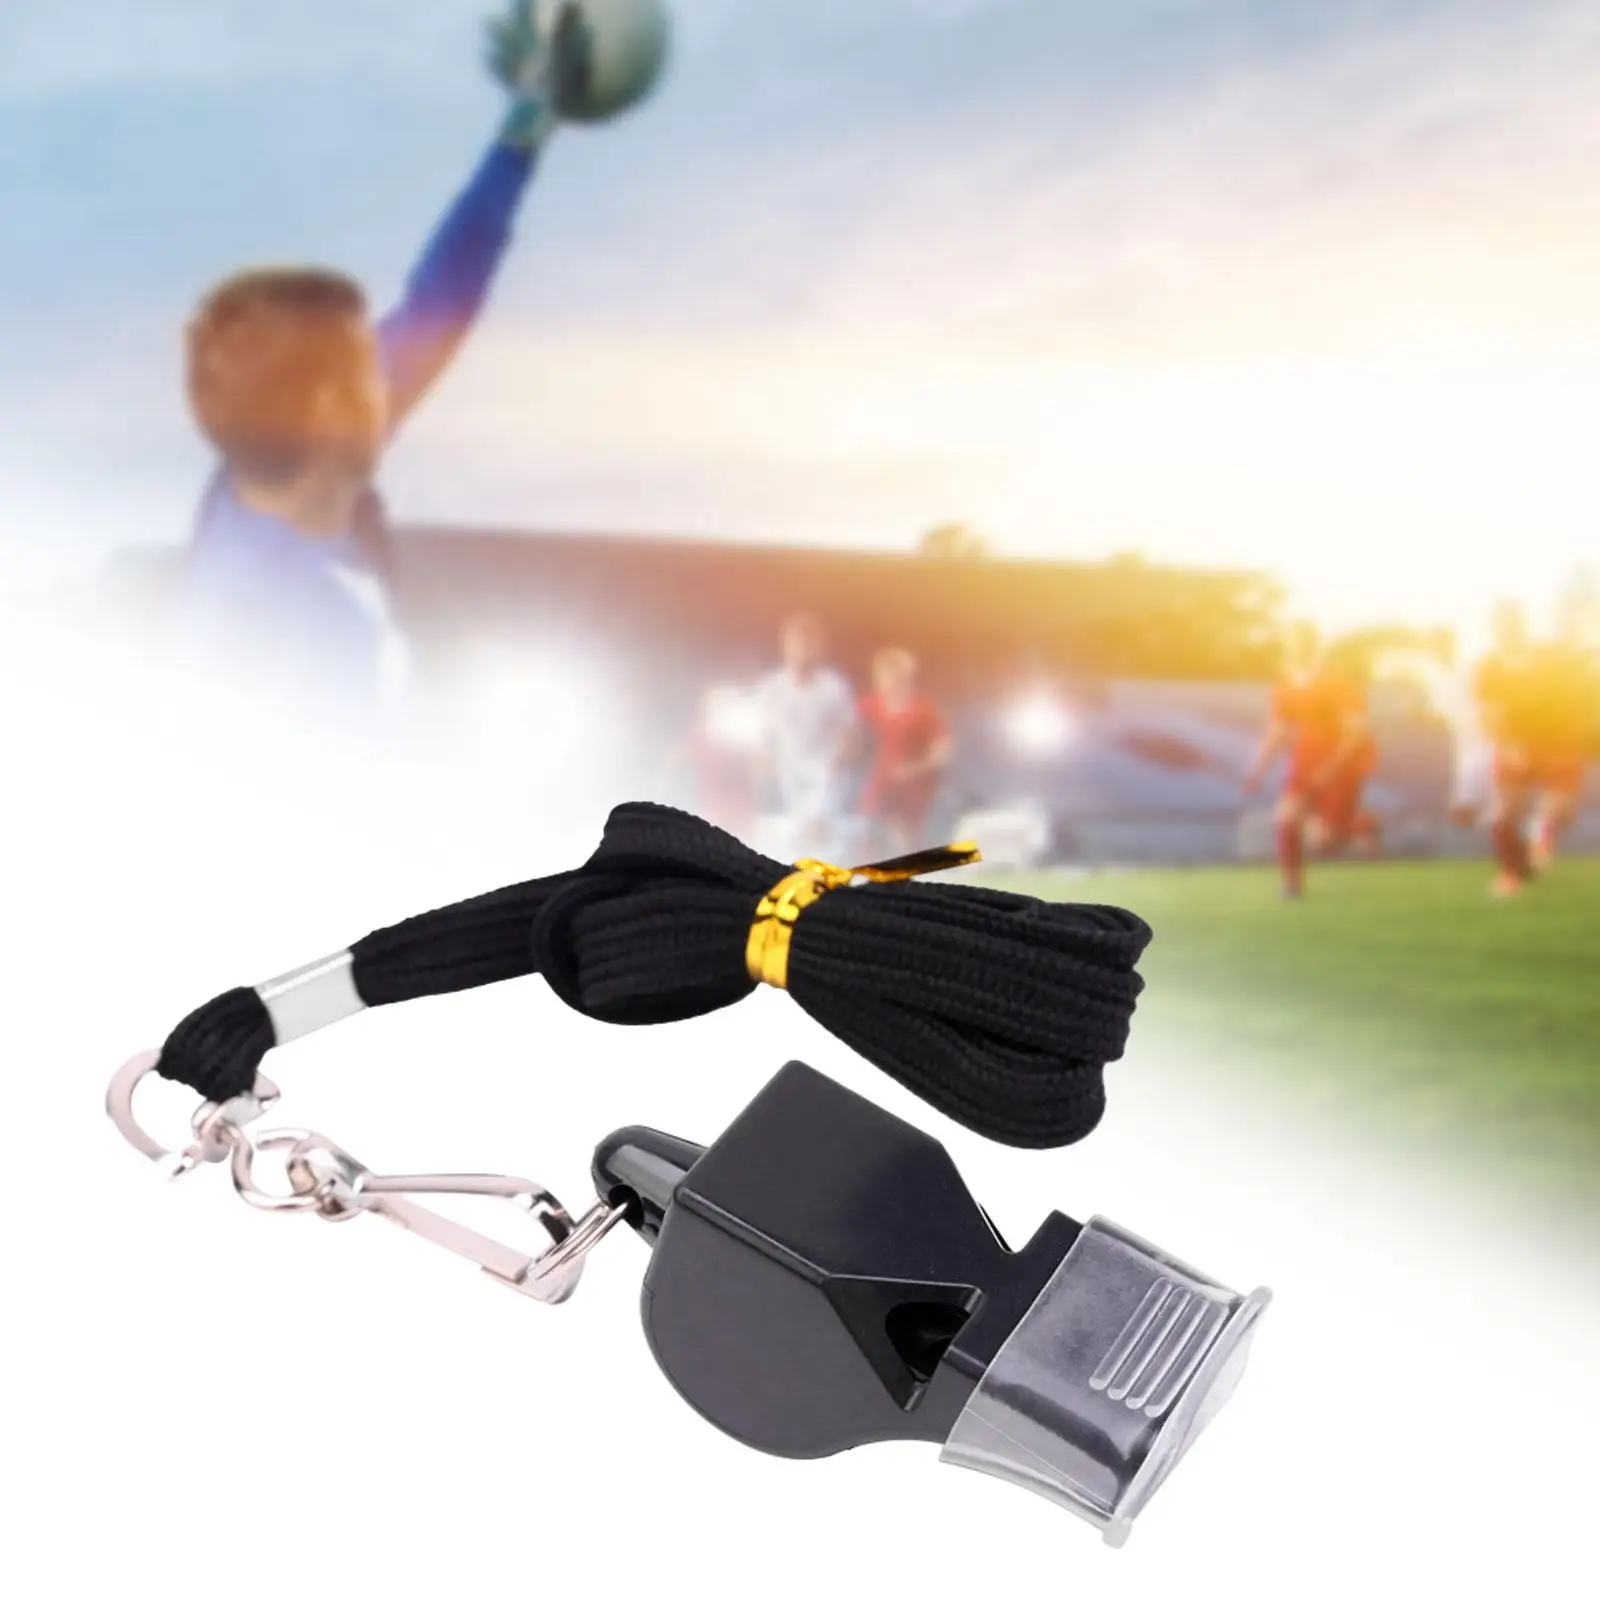 

Referee Whistle Very Loud Coaches Whistle Sports Whistle for Lifeguarding Soccer Football Match Game Dog Training Survival